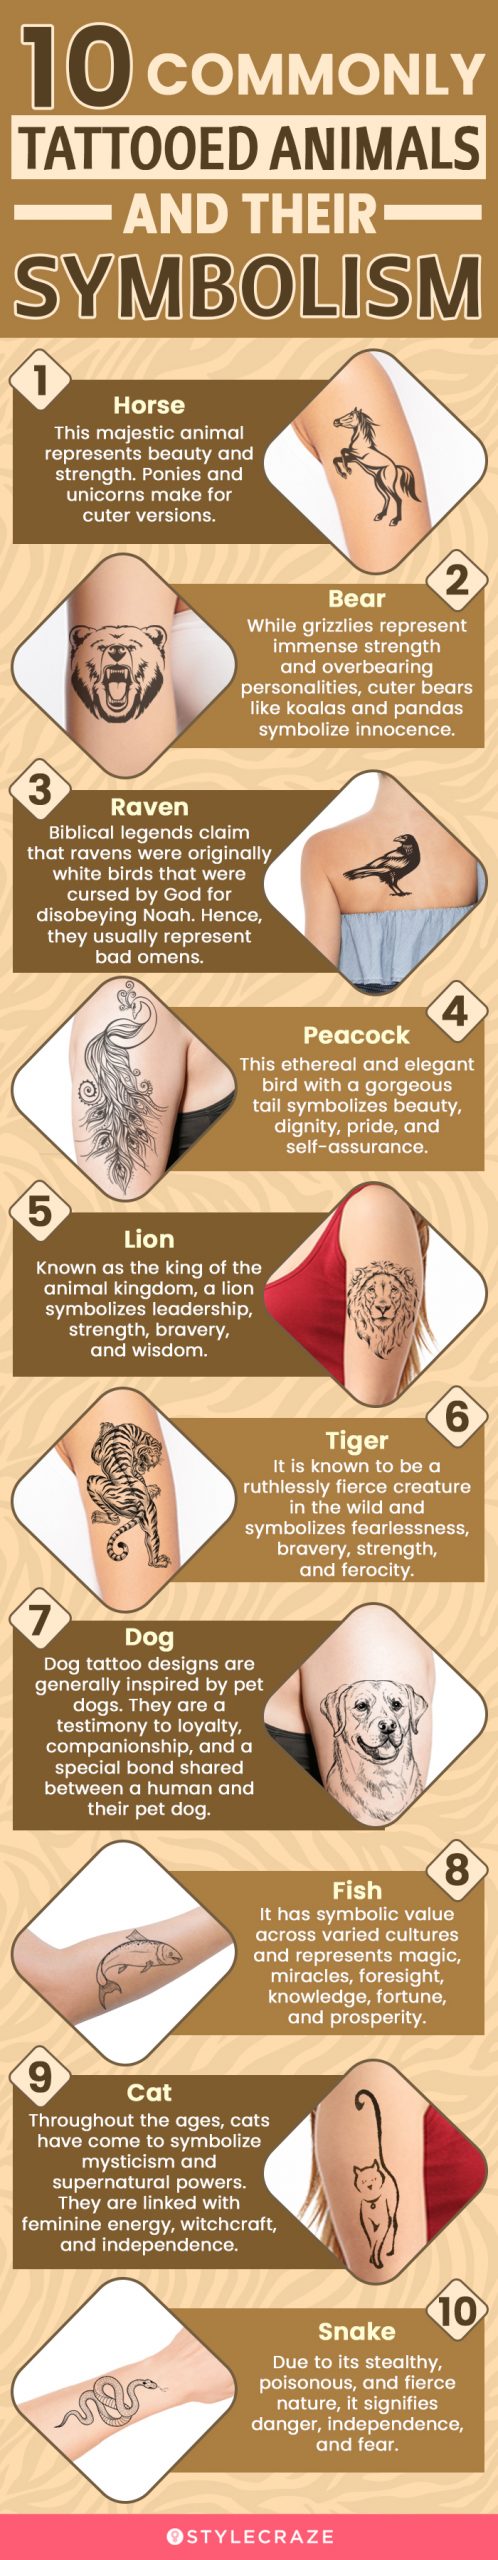 10 commonly tattooed animals and their symbolism (infographic)